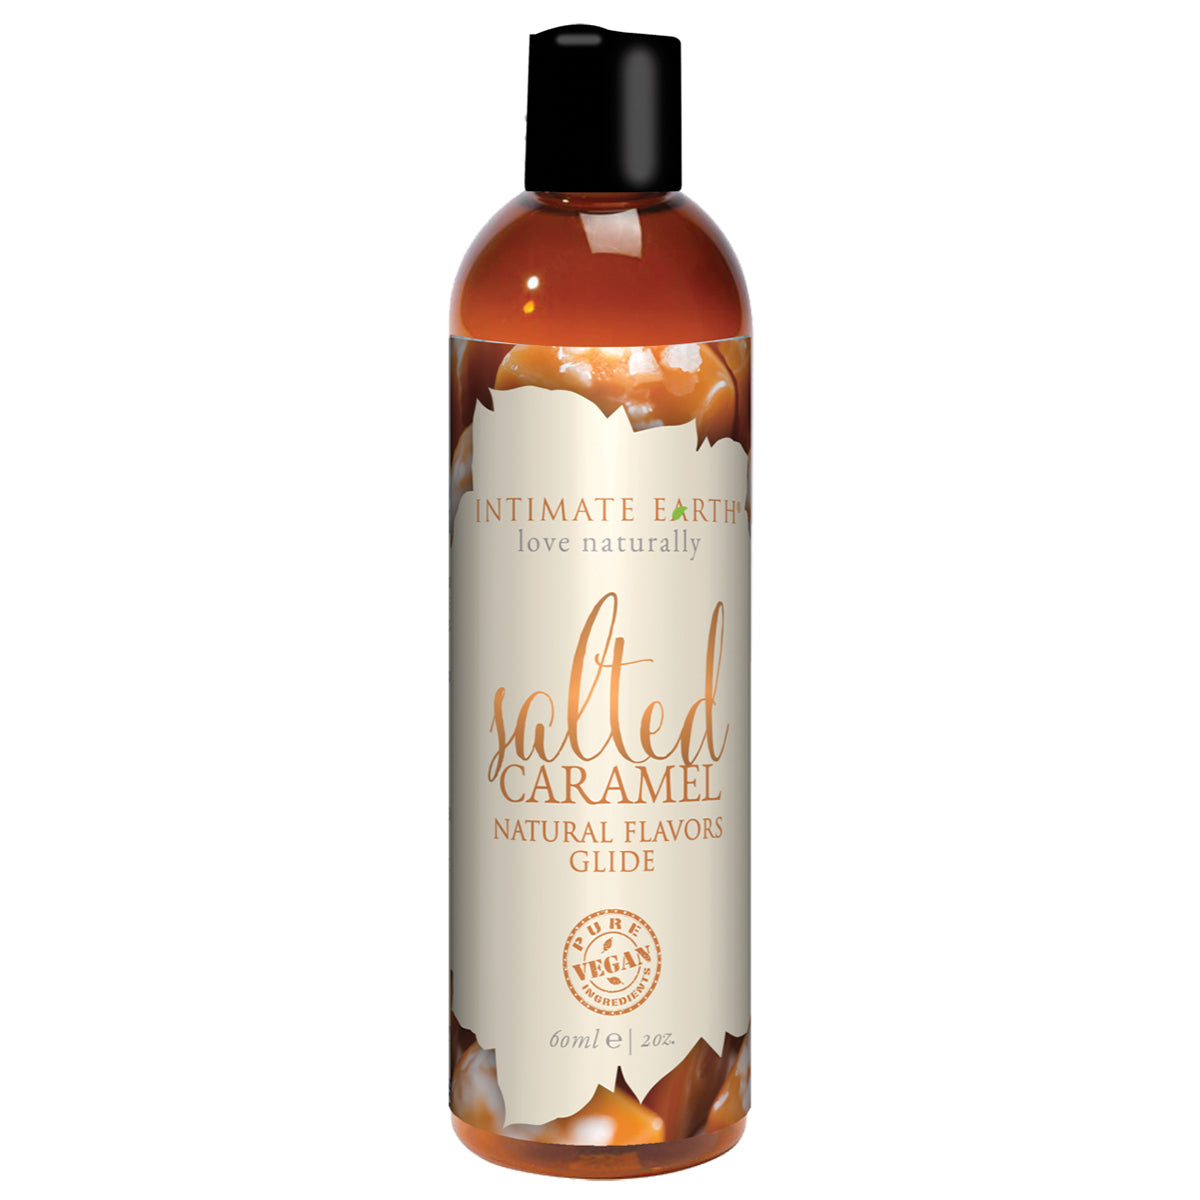 Intimate Earth Flavored Glide - Salted Caramel 2oz